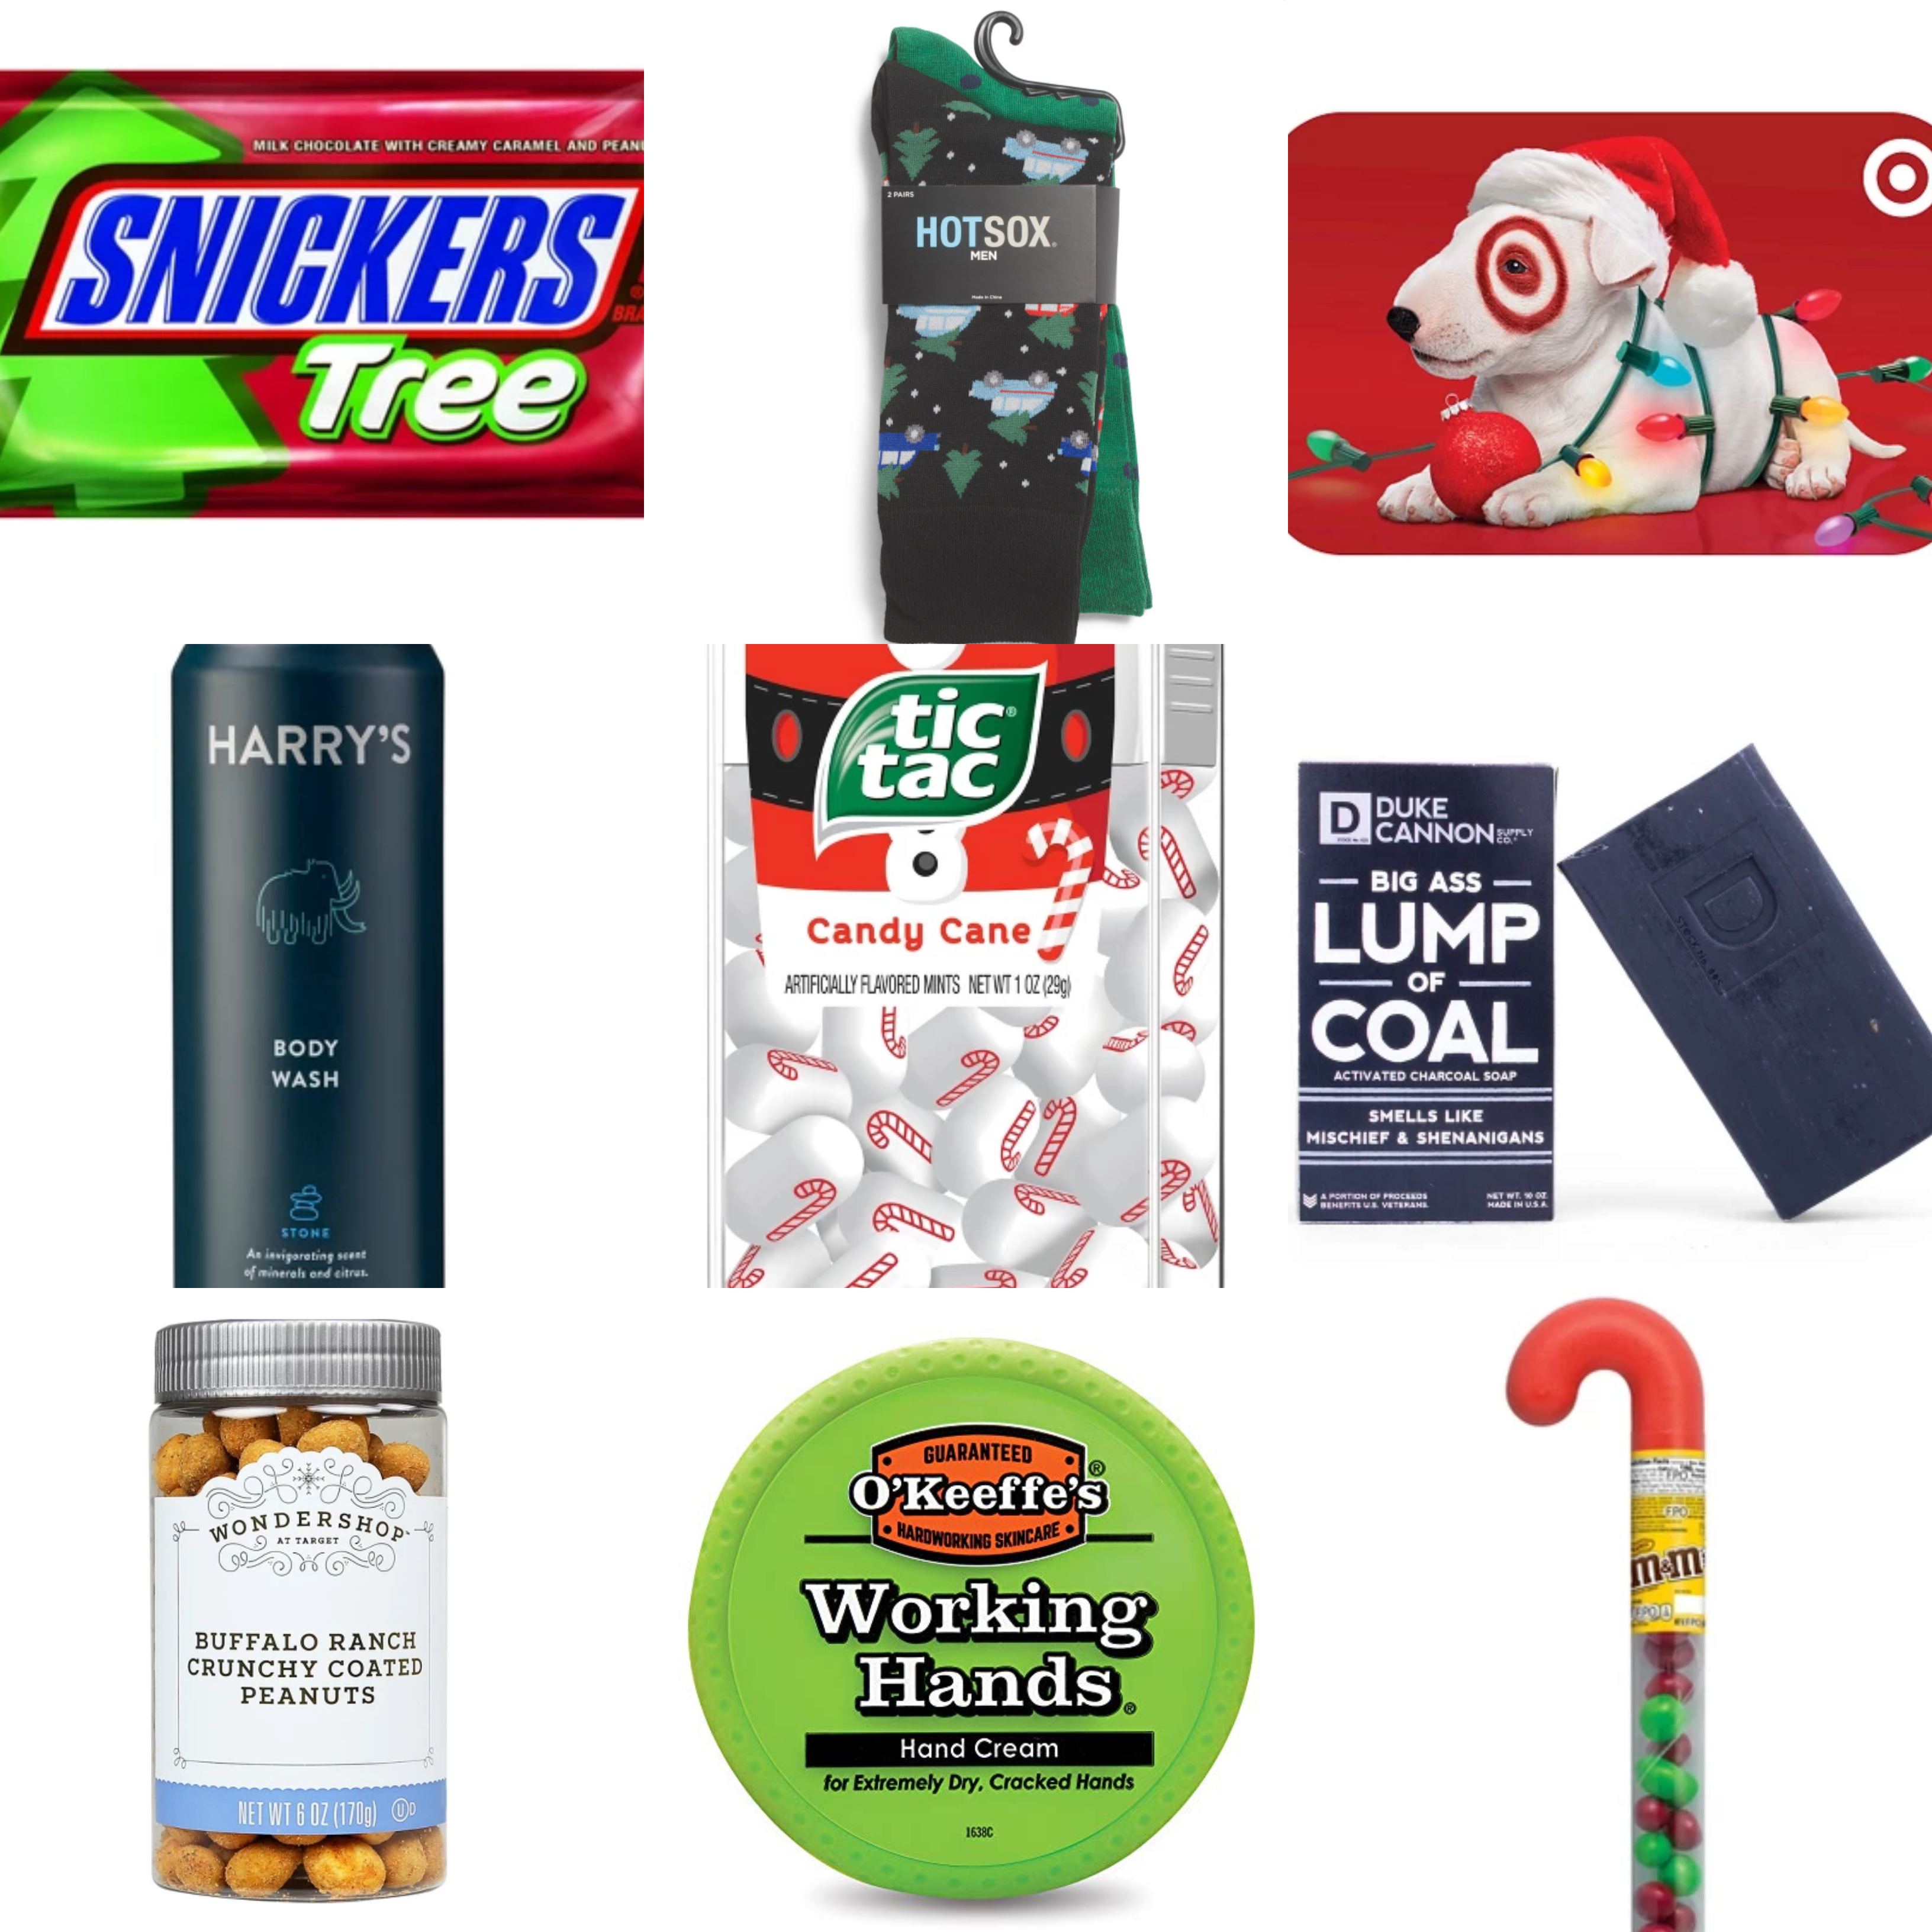 The Ultimate Stocking Stuffer Guide for Men: Ideas for Every